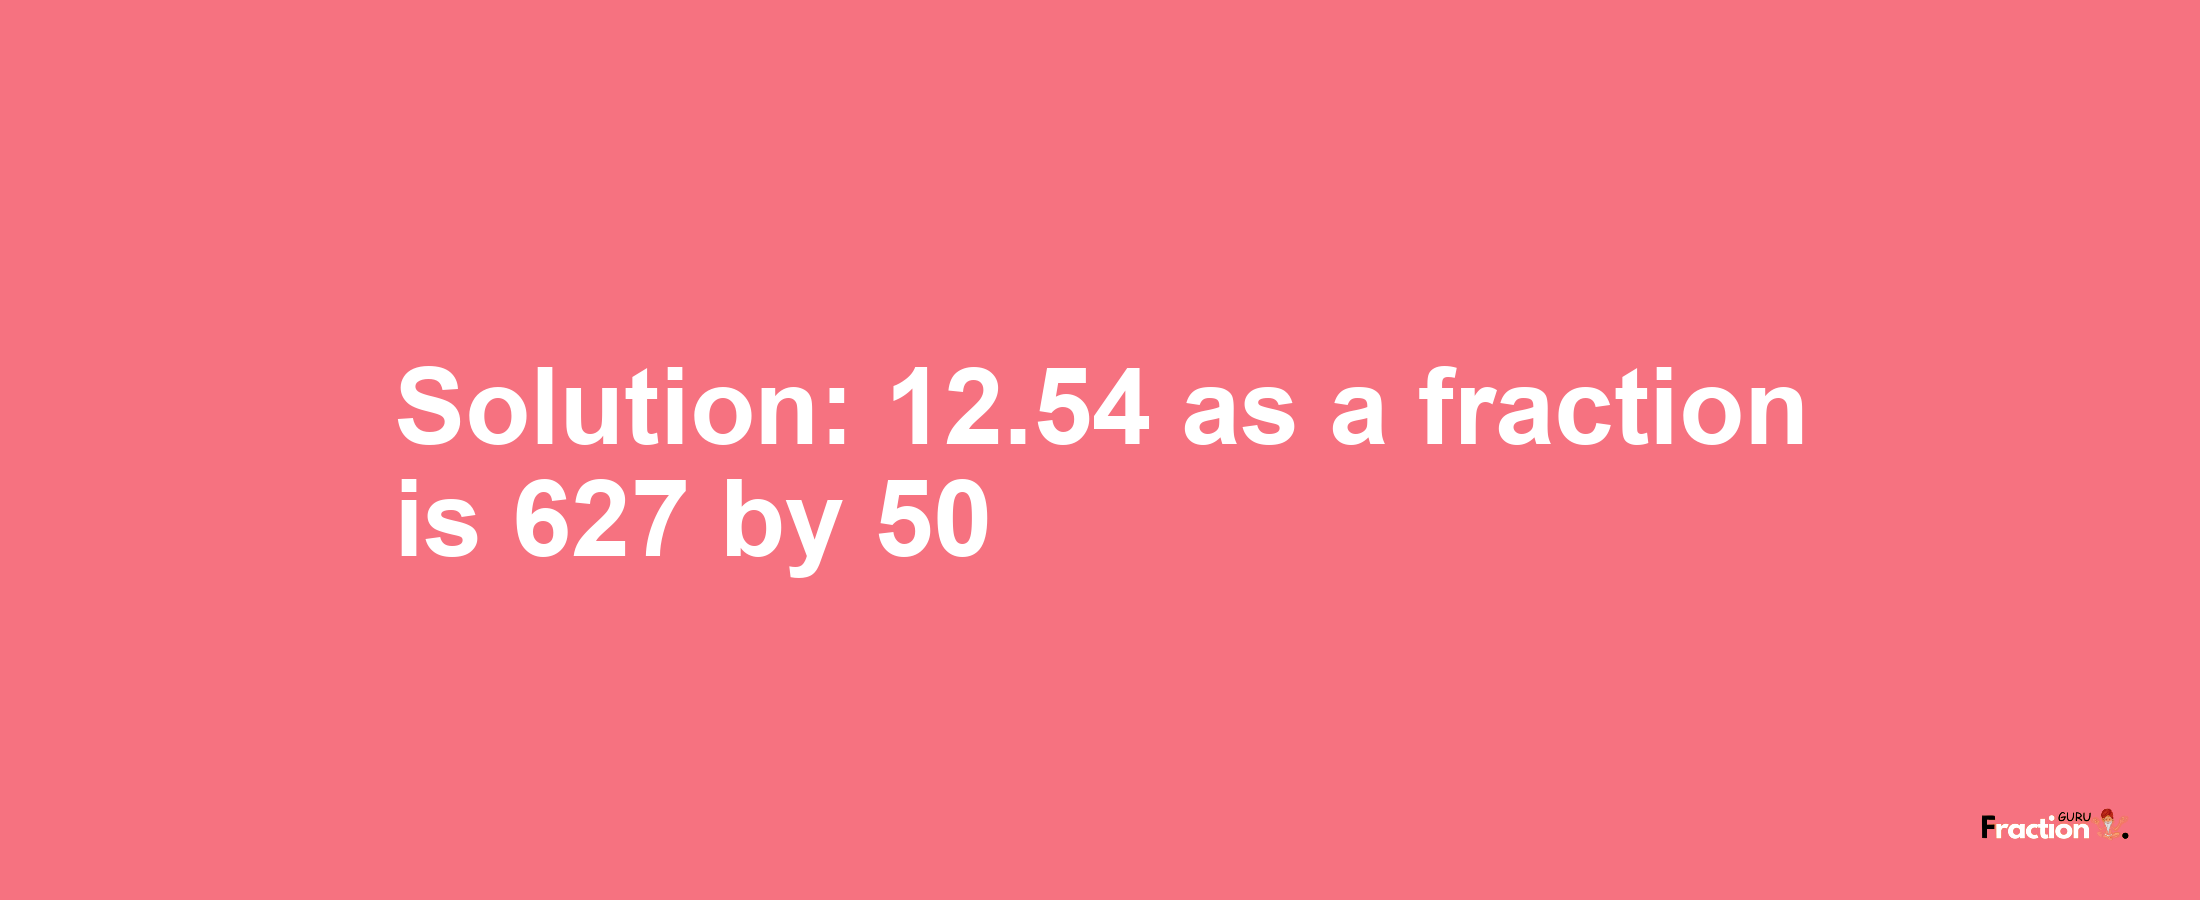 Solution:12.54 as a fraction is 627/50